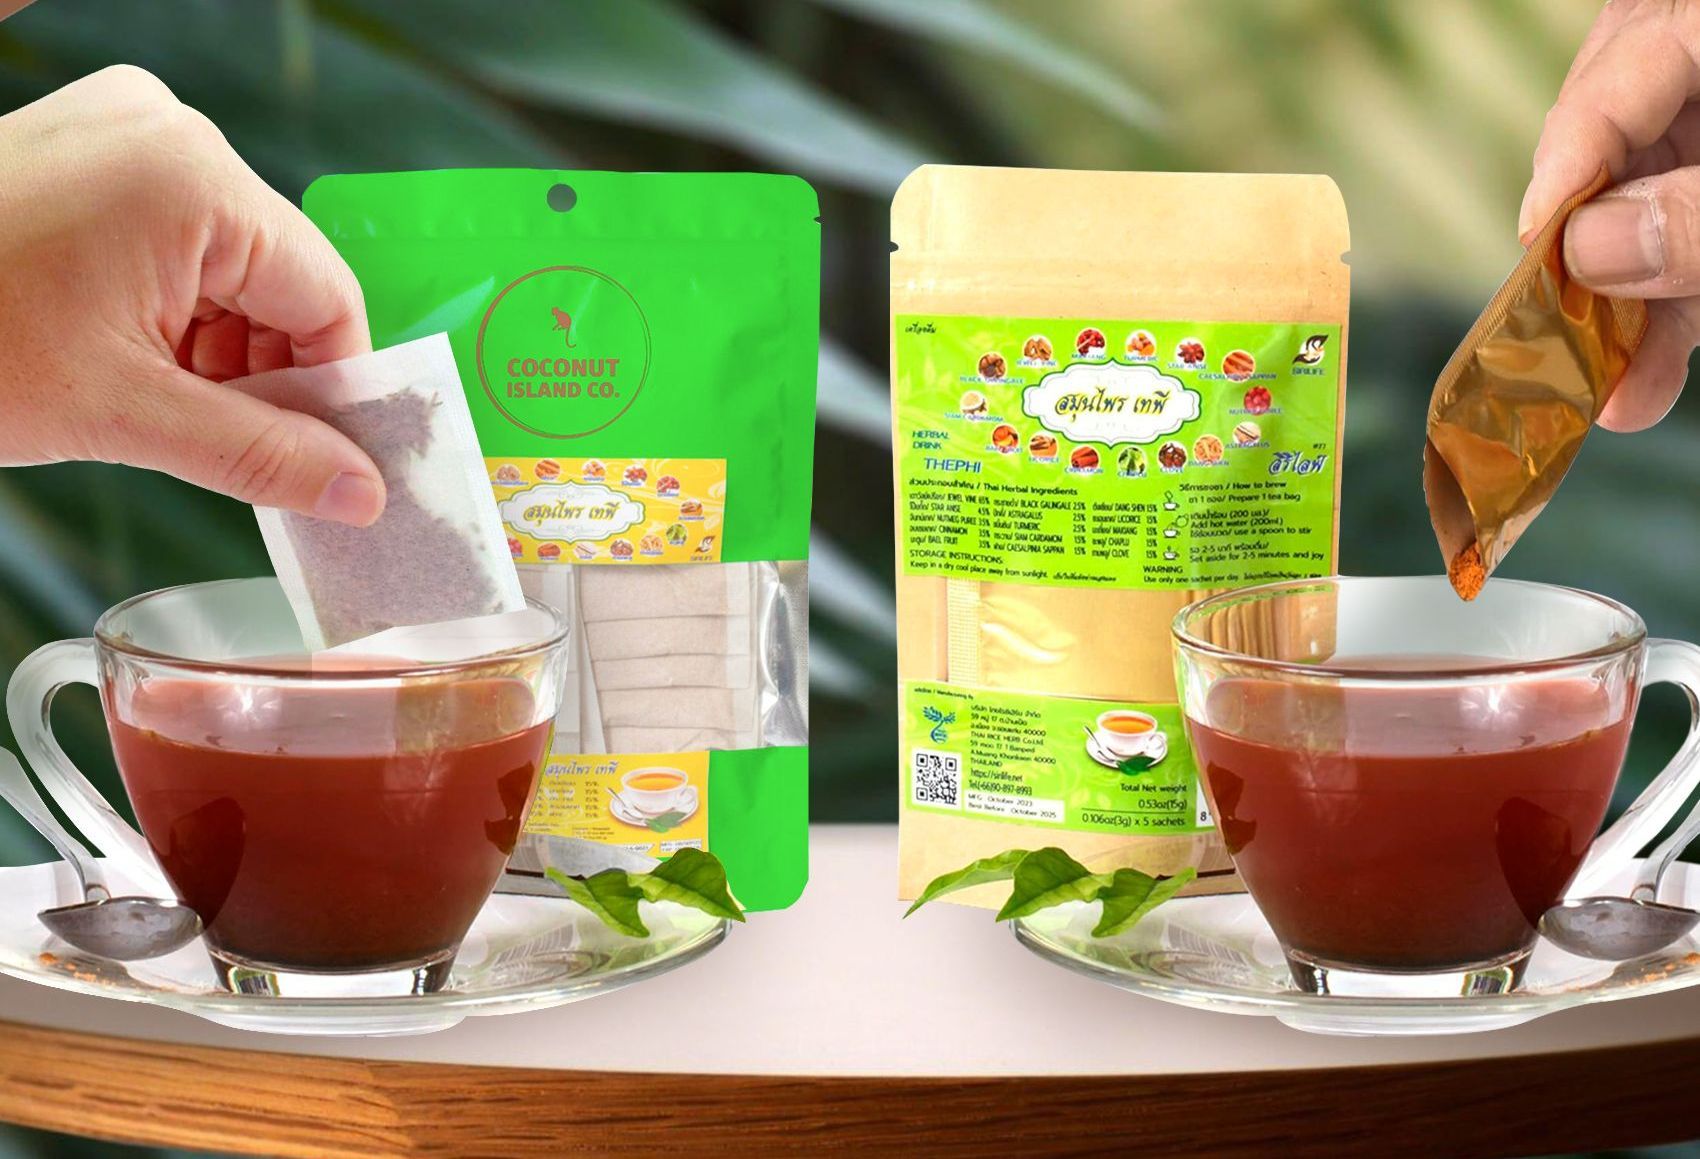 a person is pouring a bag of tapee tea into a cup of tea .